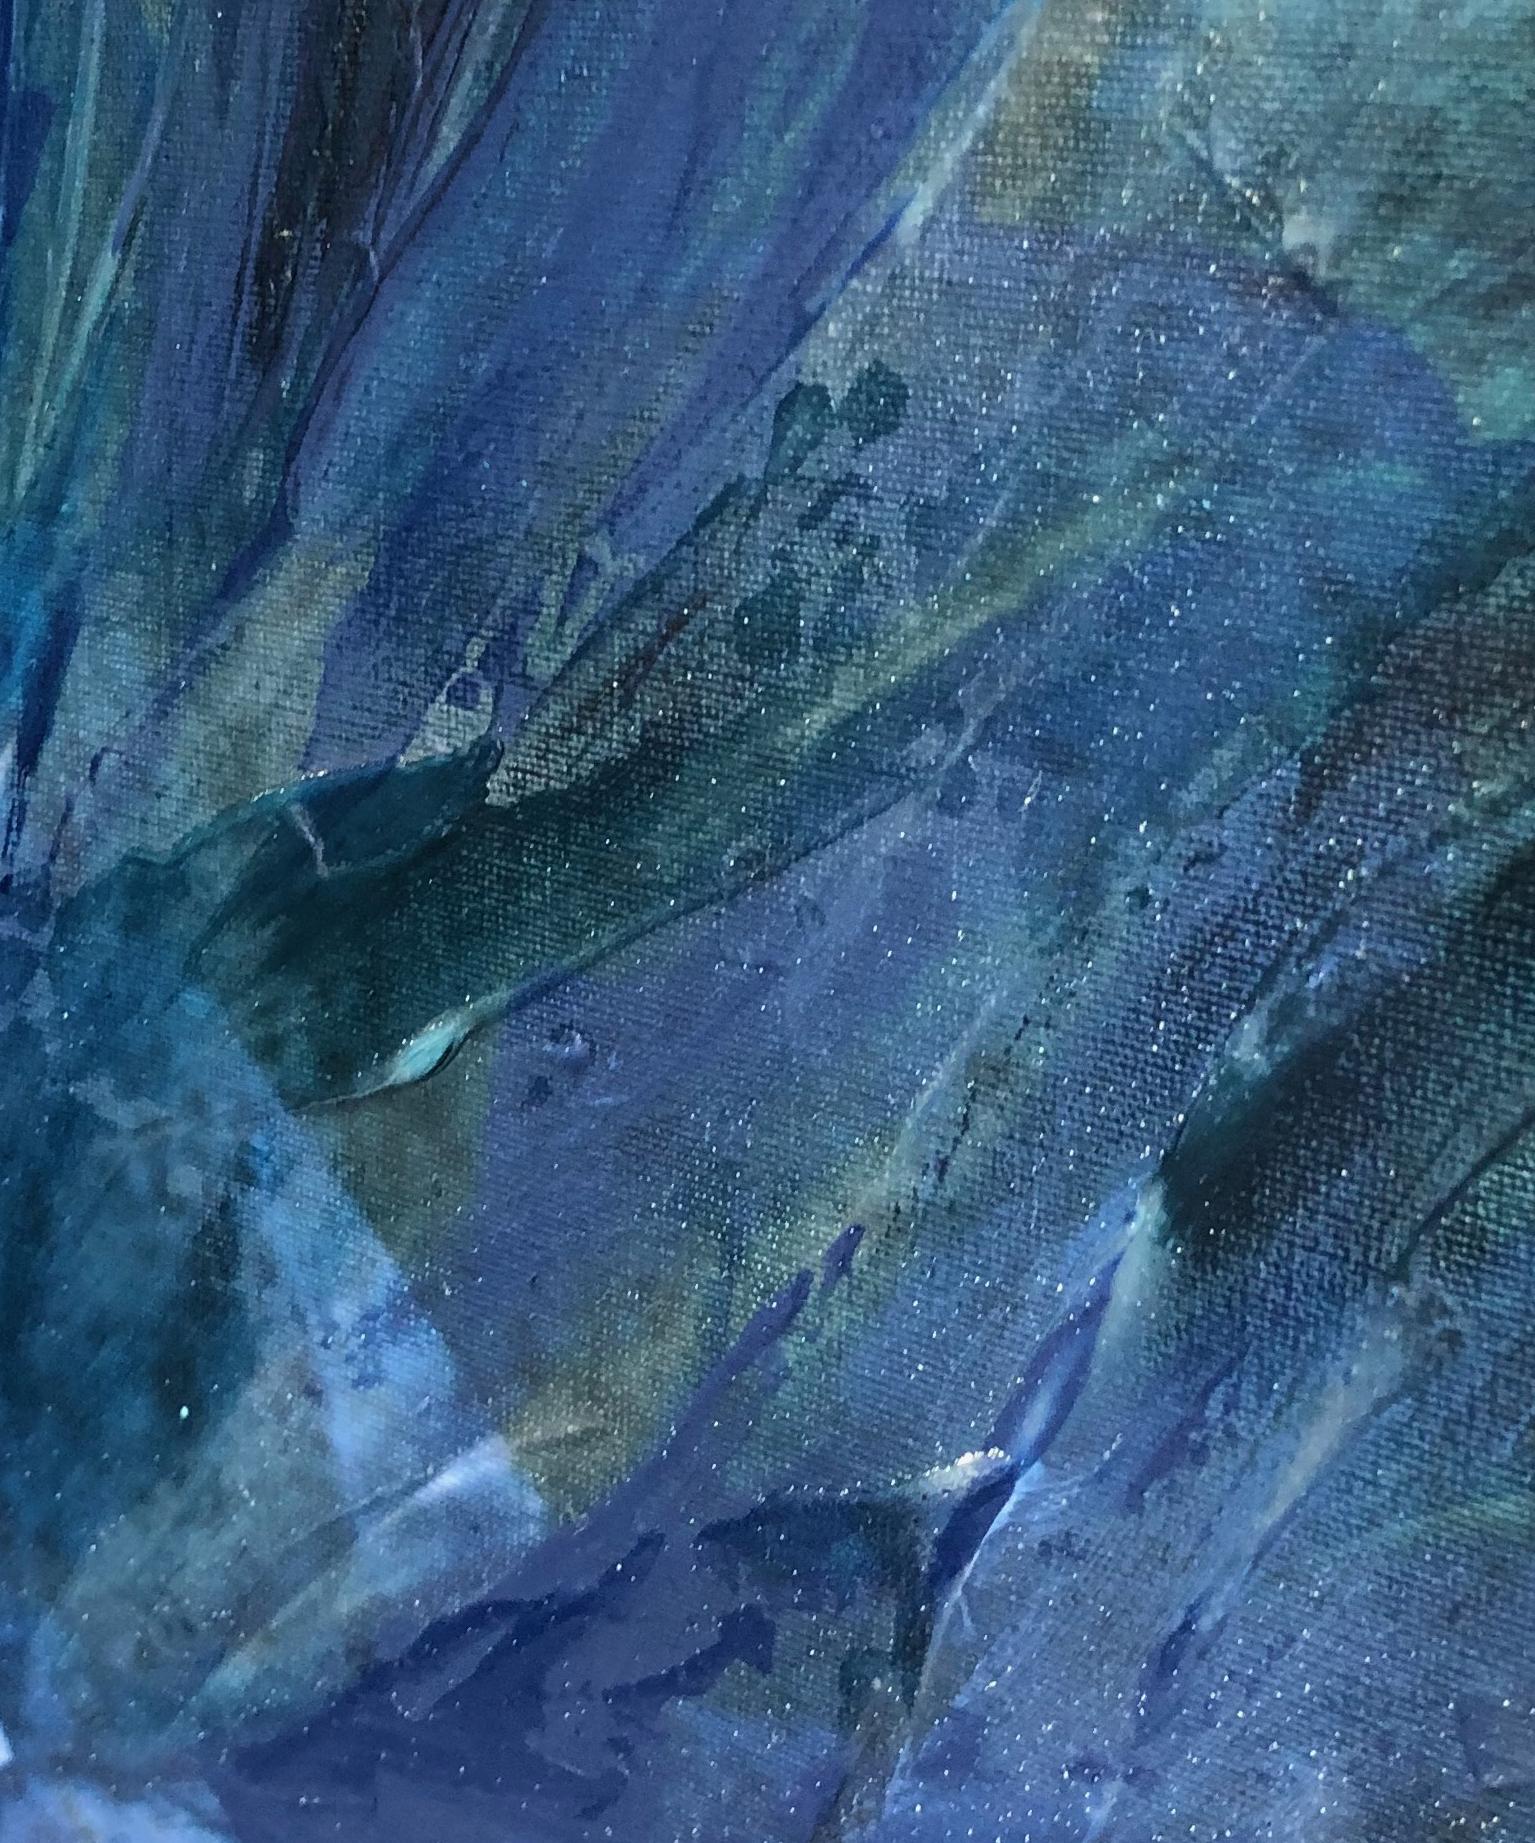 Peacock I, Blue Green Painting, Mixed Media Textured on Canvas 60 H X 40